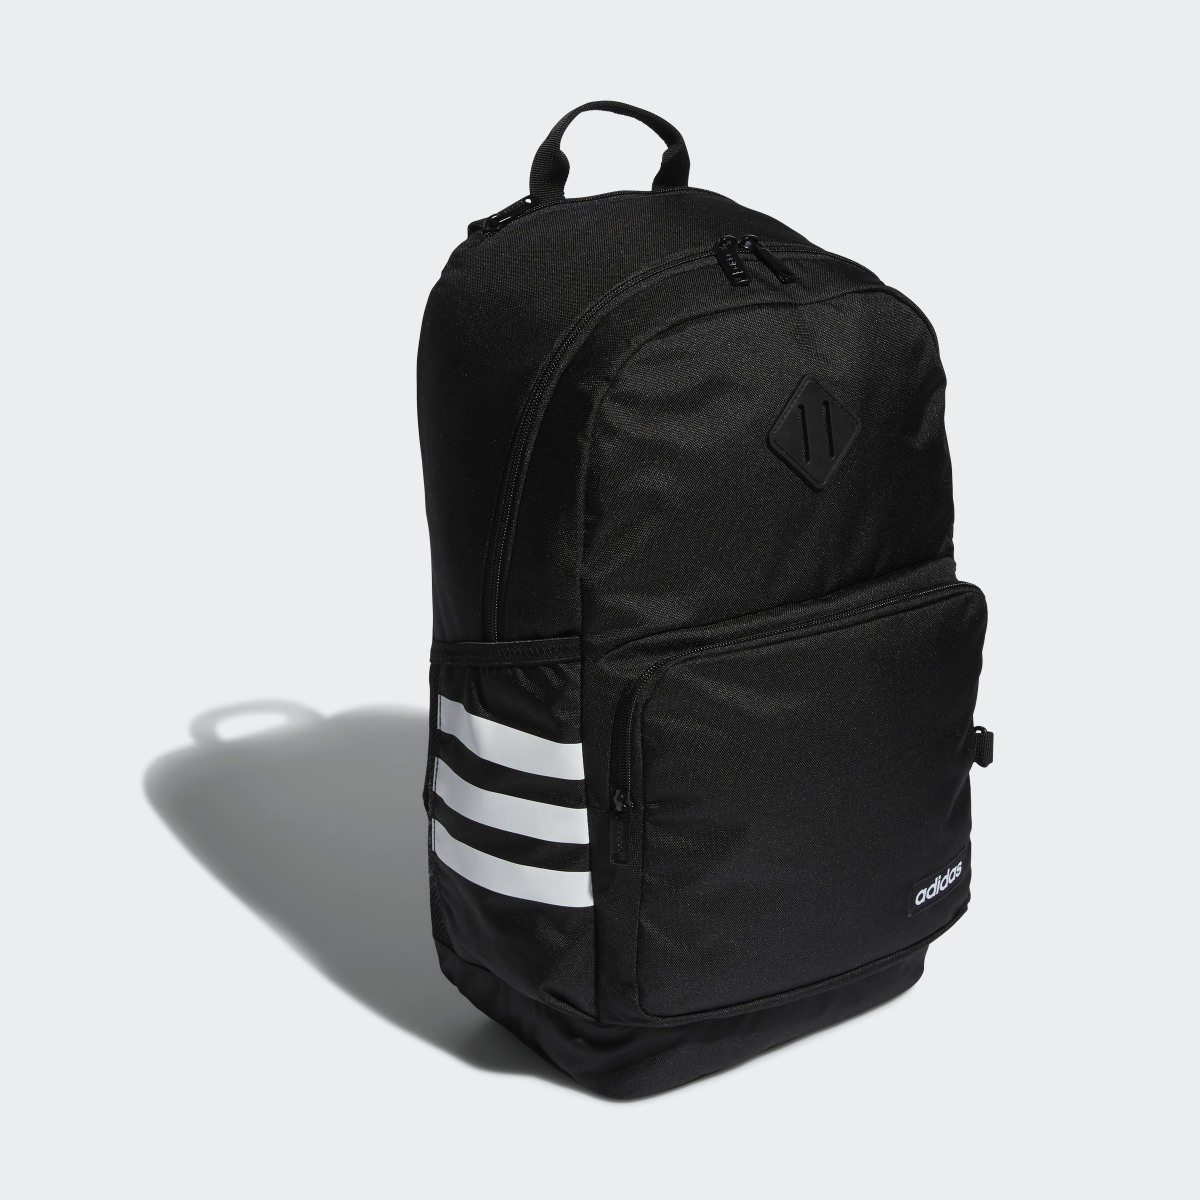 Adidas Classic 3-Stripes Backpack. 4